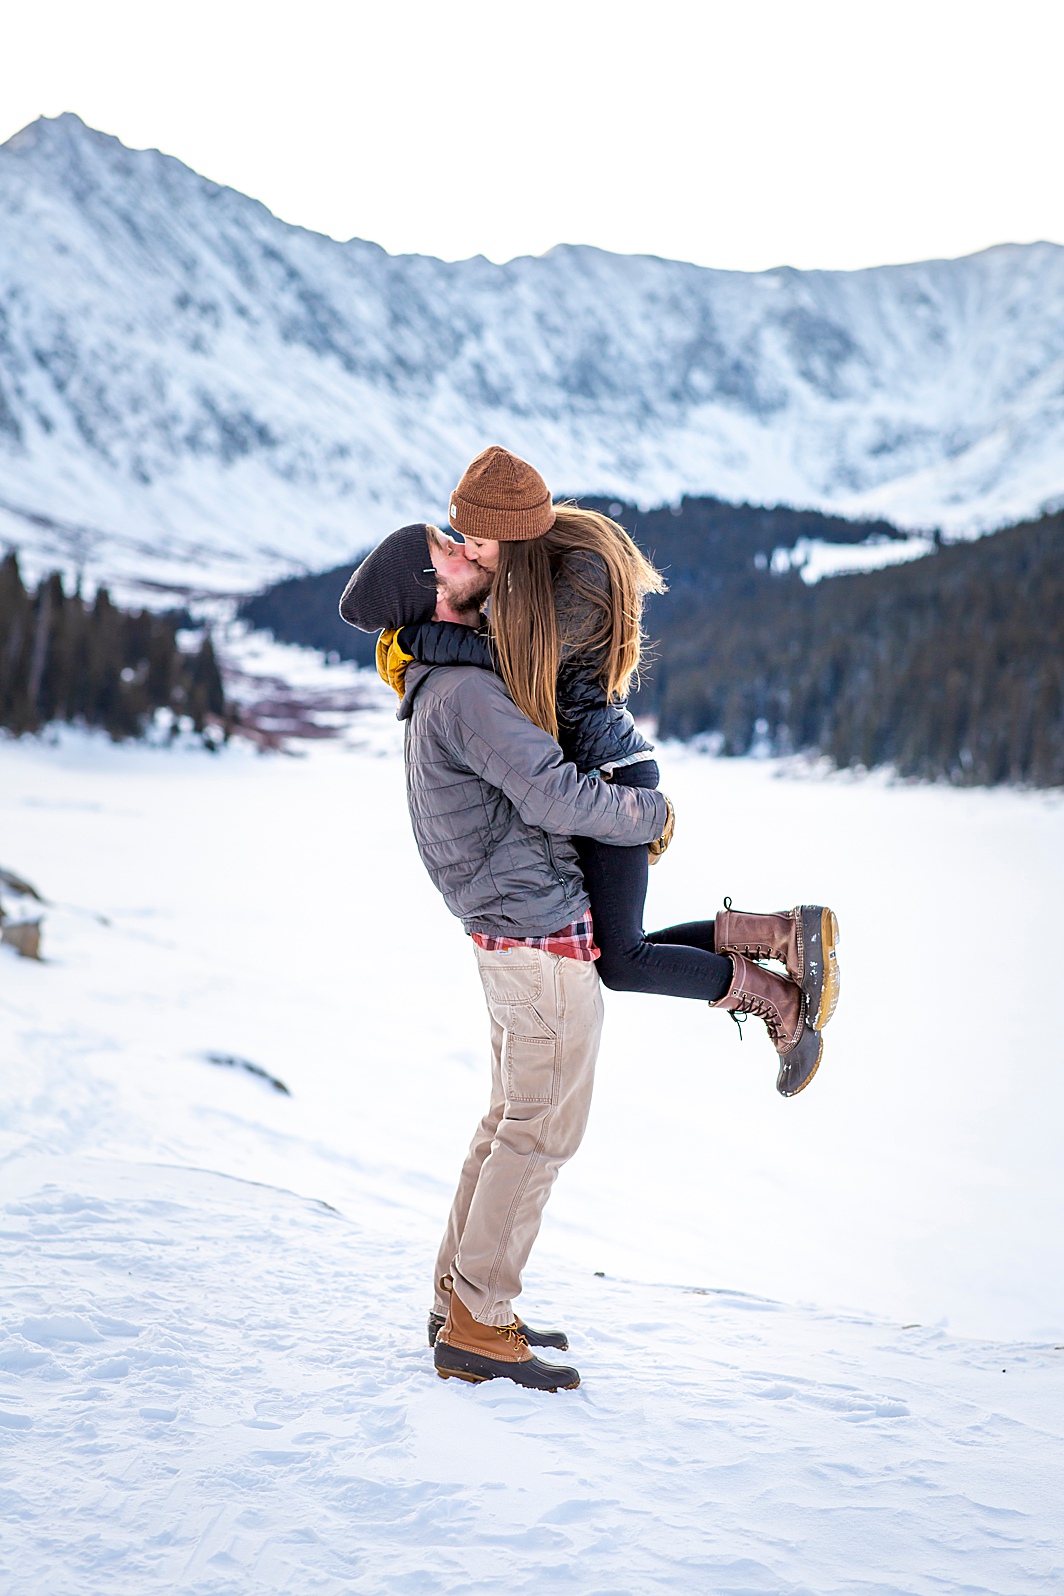 Man lifts woman for a kiss in Breckenridge, Colorado. Engagement Photo taken by Hillary Shedd Photography, Colorado Wedding Photographer. 